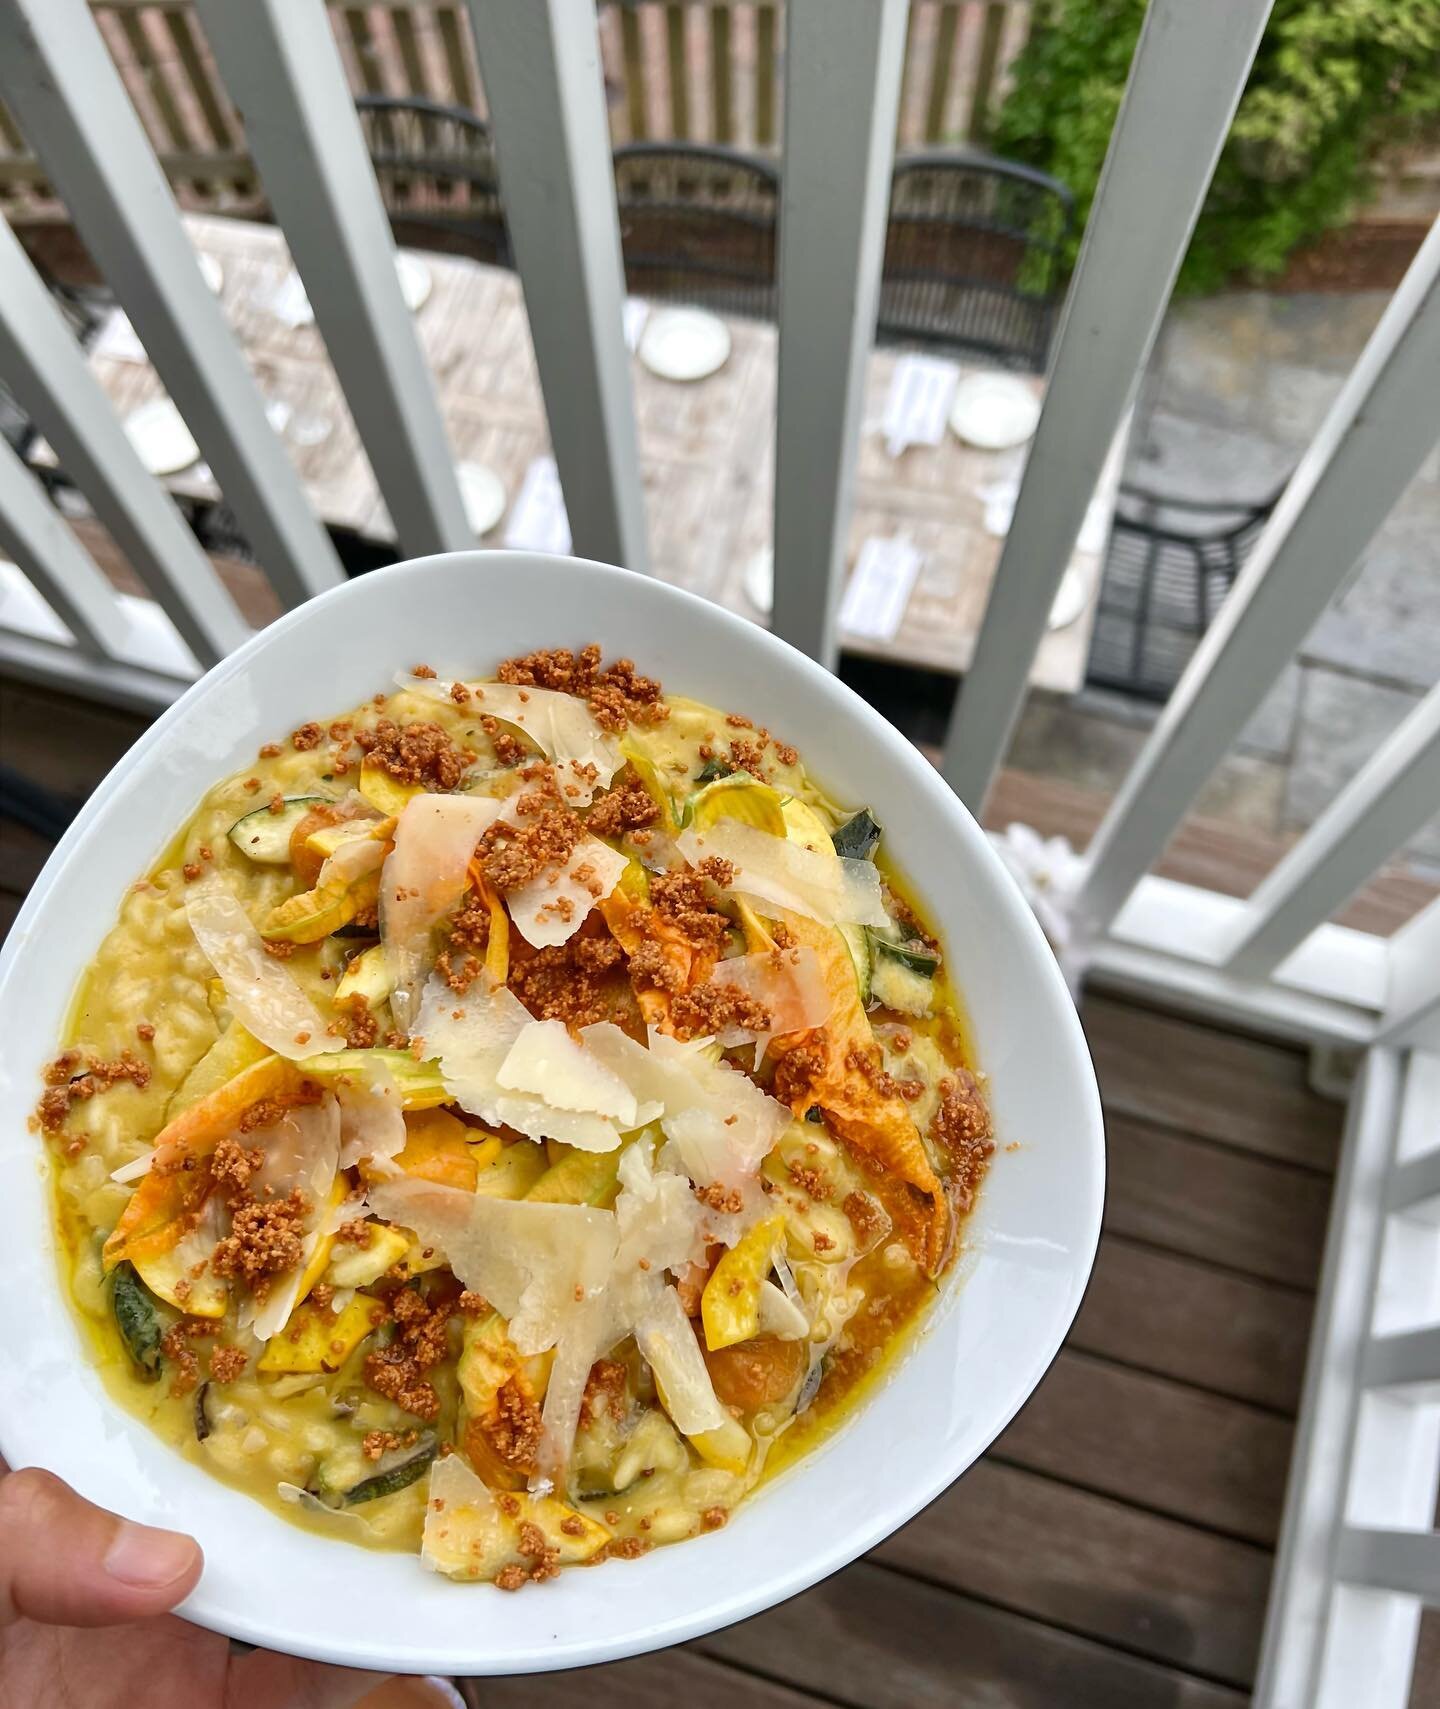 all the squashing your little hearts can handle tonight, friends!  New risotto featuring local zuke escabeche, gold bar squash, blossoms, parm, brown butter &amp; basil from our very own macys lane greenhouse!  Pop in! 🌞 
.
.
.
#nantucket #ack #loca